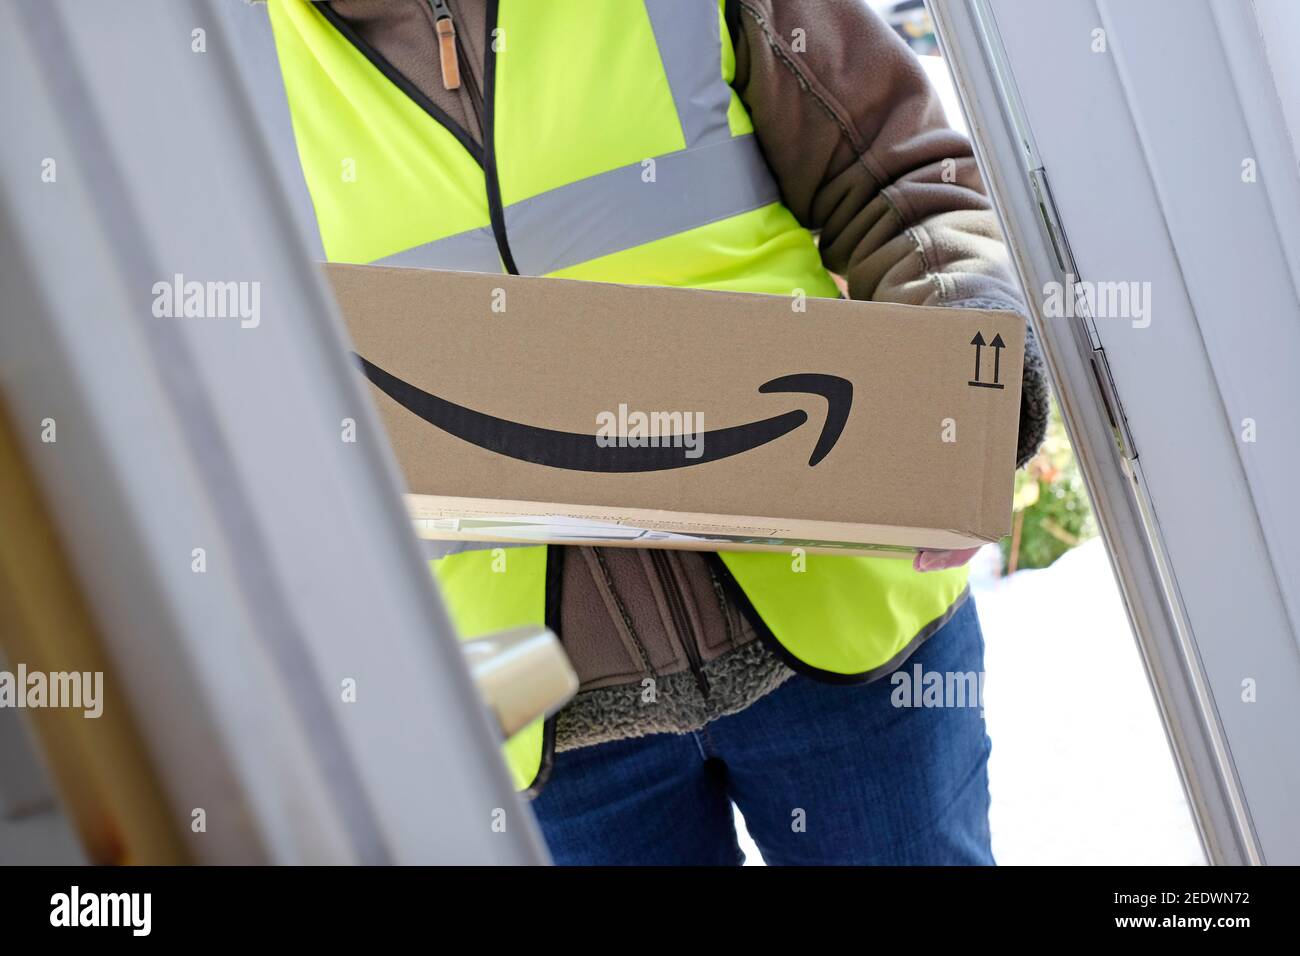 person delivering amazon parcel at front door, norfolk, england Stock Photo